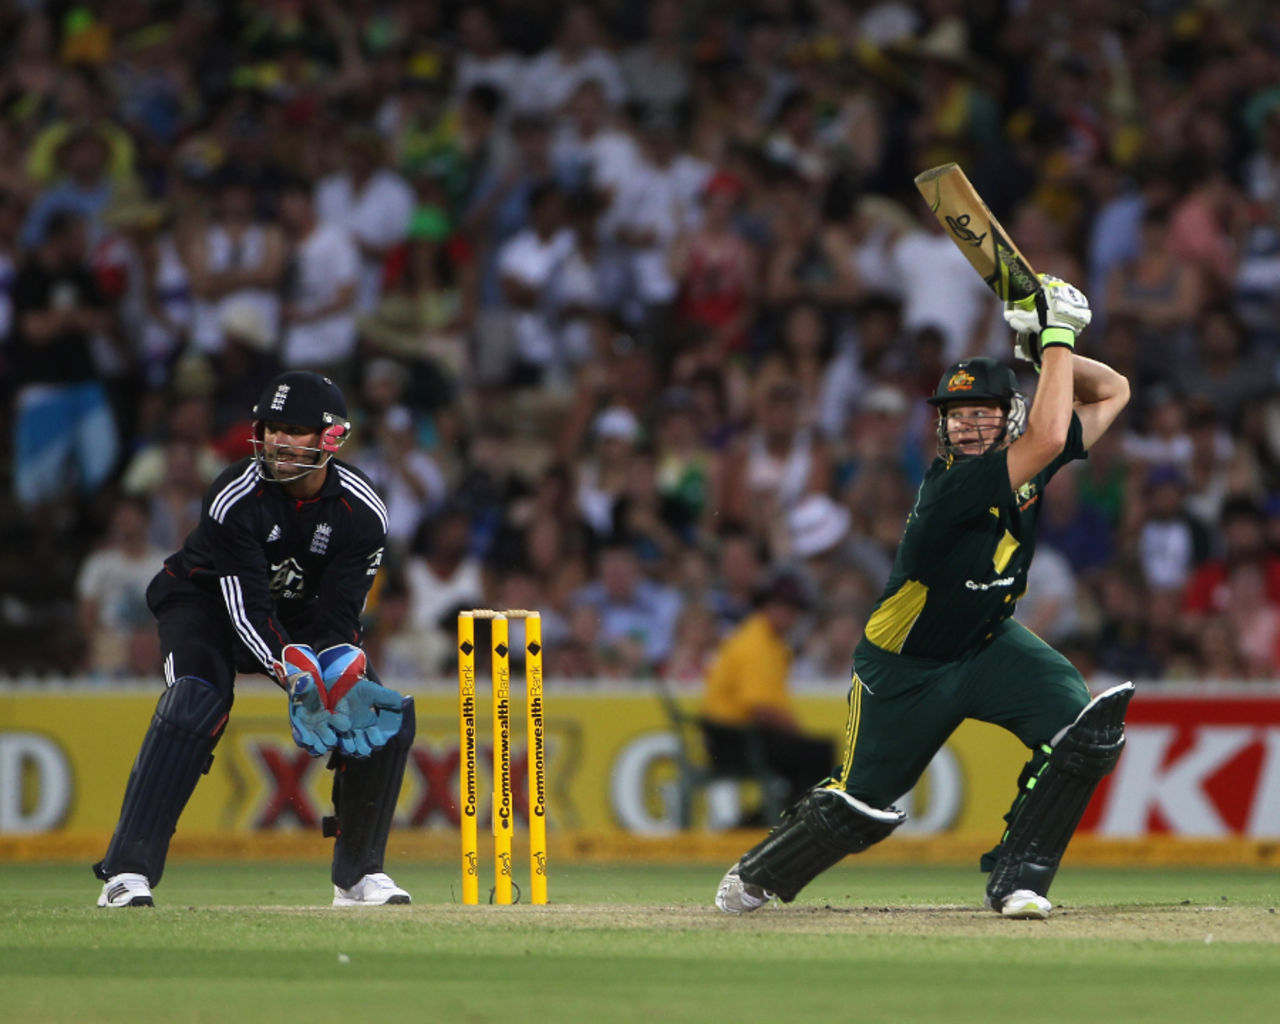 Steve Smith hit out in typical style during his unbeaten 46, Australia v England, 4th ODI, Adelaide, January 26, 2011